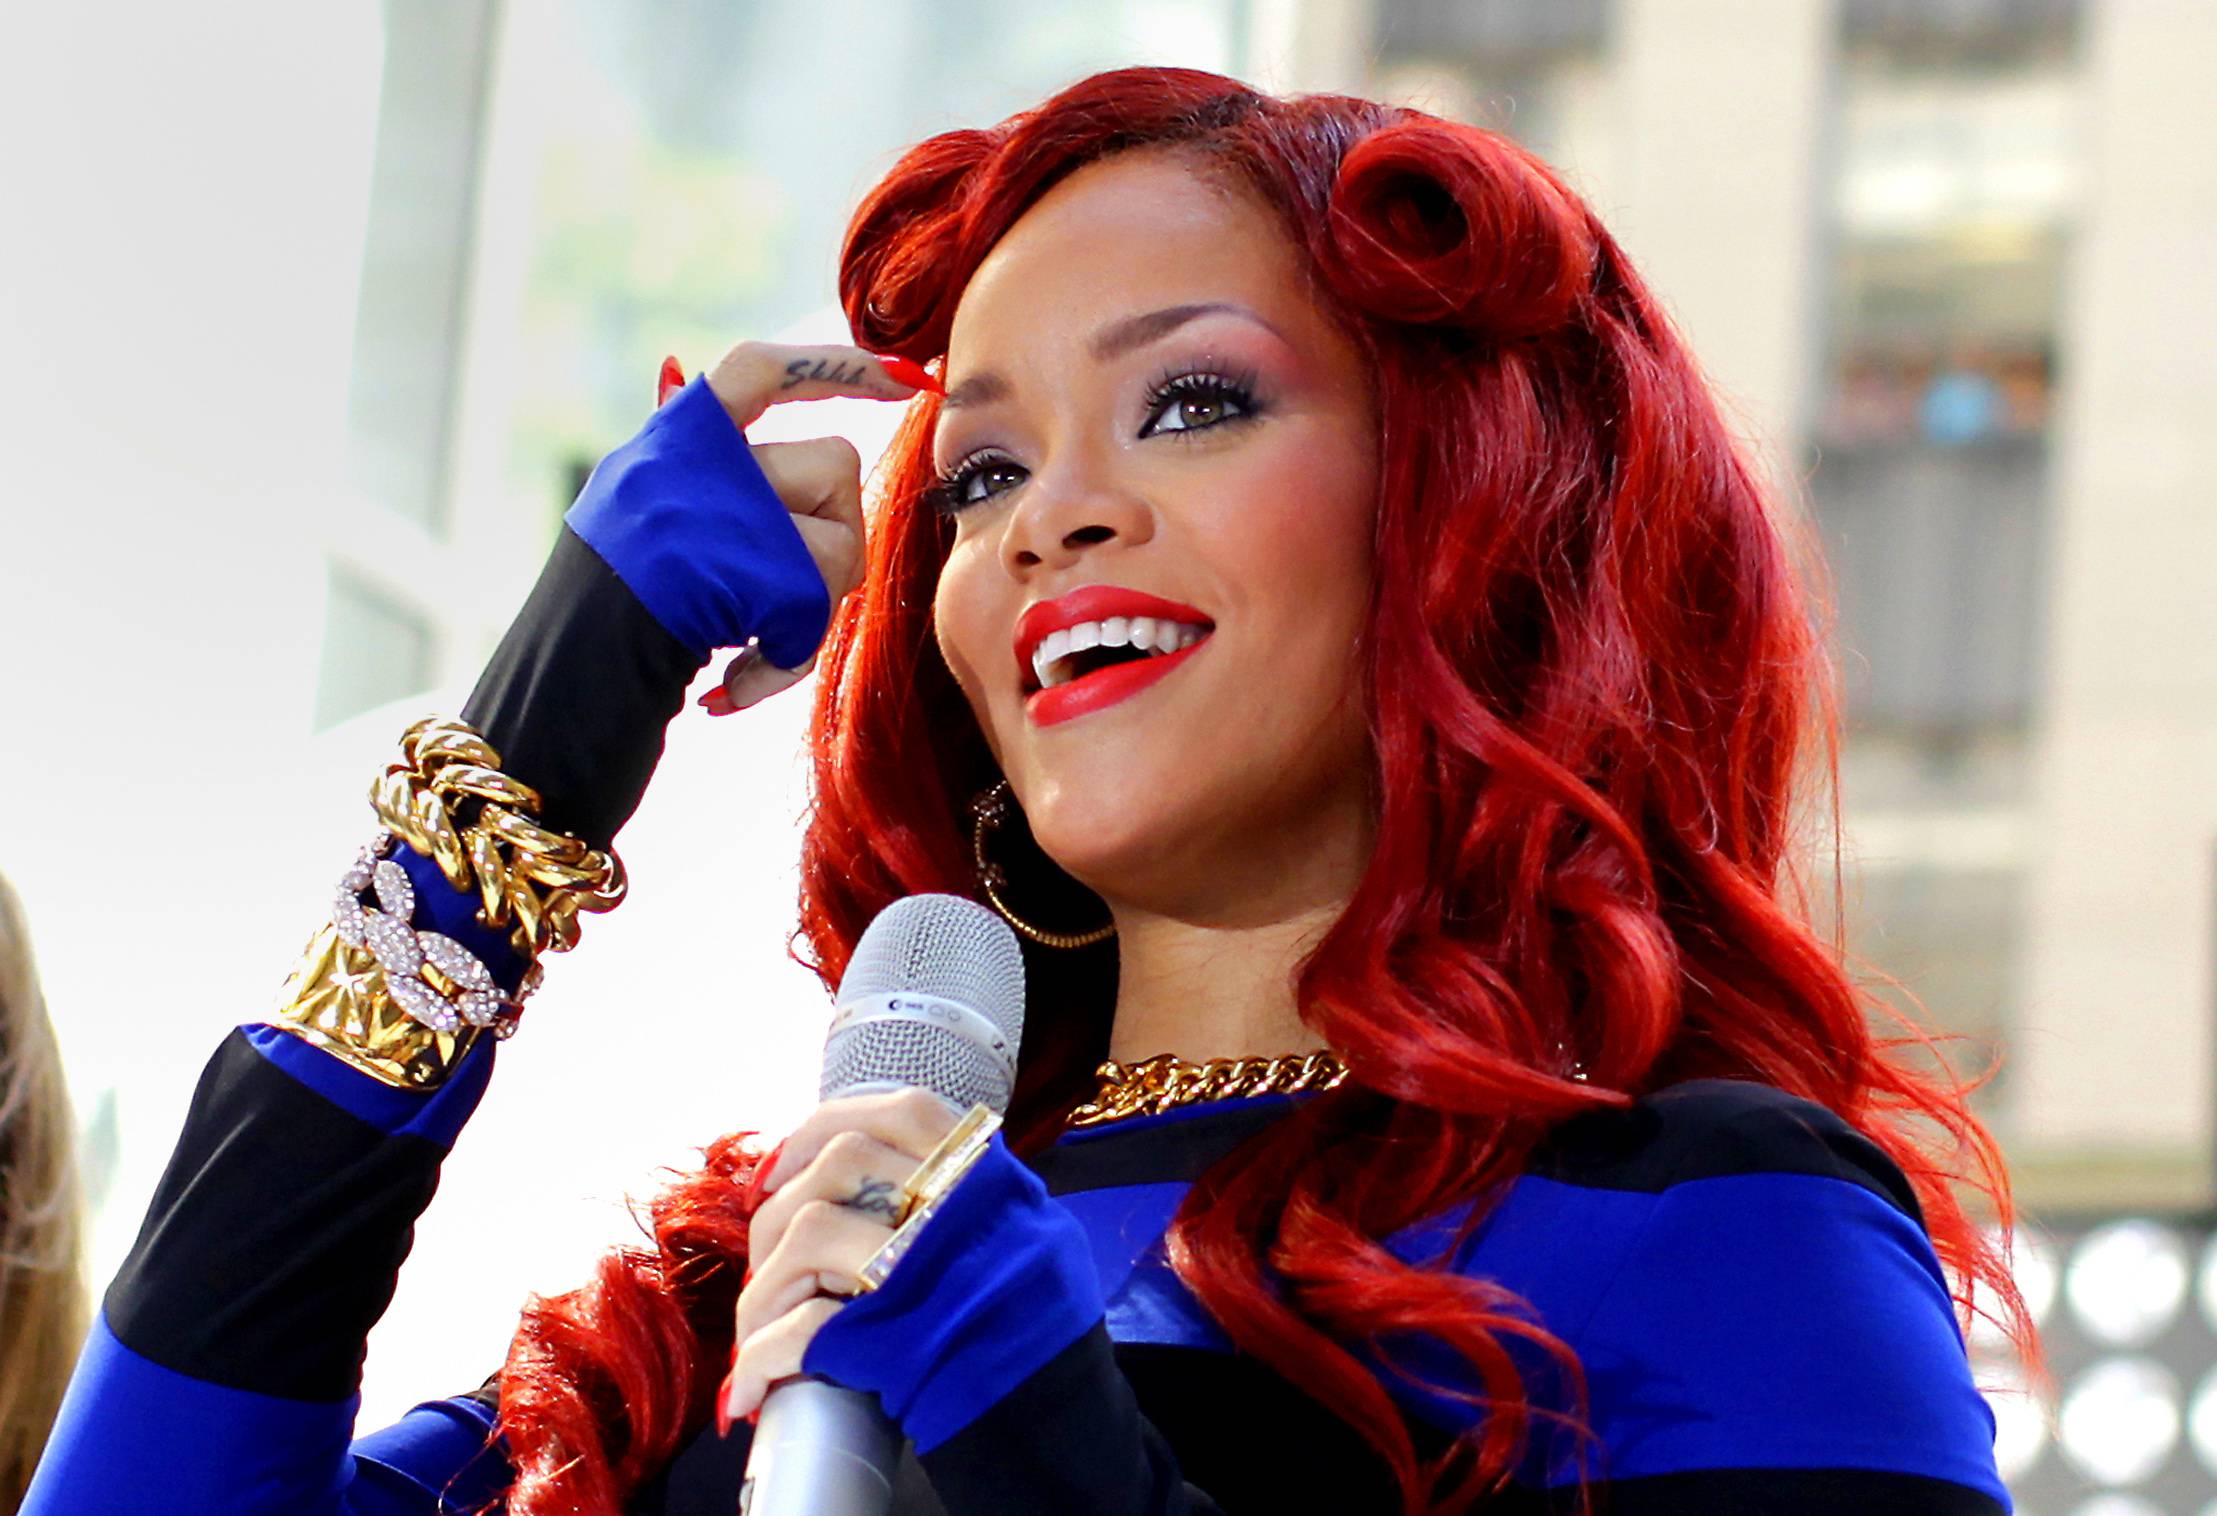 Best Female R&amp;B Artist - Rihanna - Five chart-topping singles (&quot;S&amp;M,&quot; &quot;What's My Name?,&quot; &quot;Only Girl [In the World],&quot; &quot;California King Bed,&quot; and &quot;Man Down,&quot;) helped Rihanna seal the deal on winning this award.